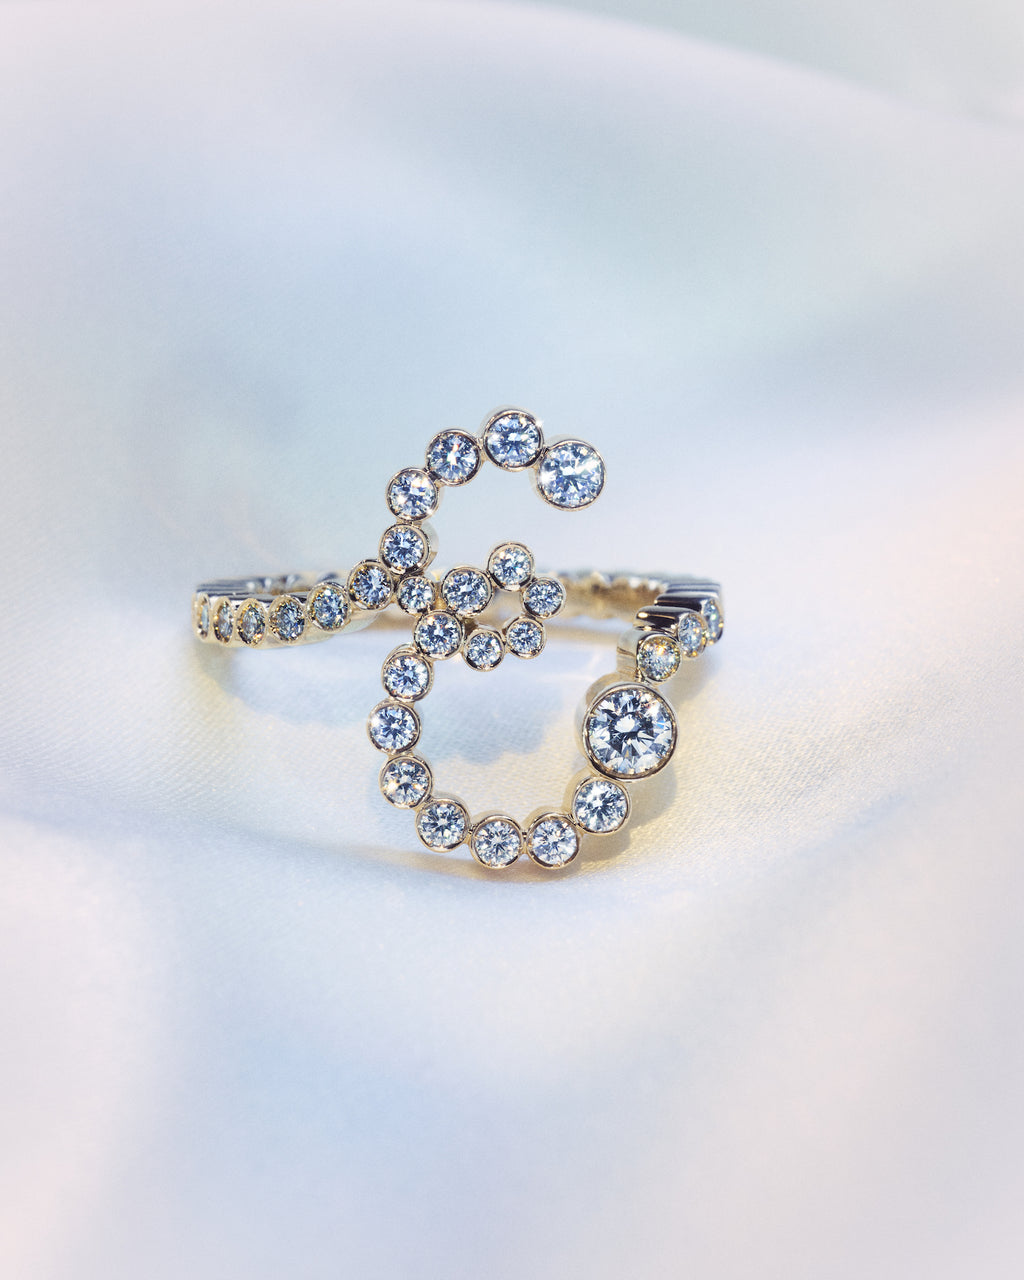 18K yellow gold diamond ring shaped as the letter 'E'